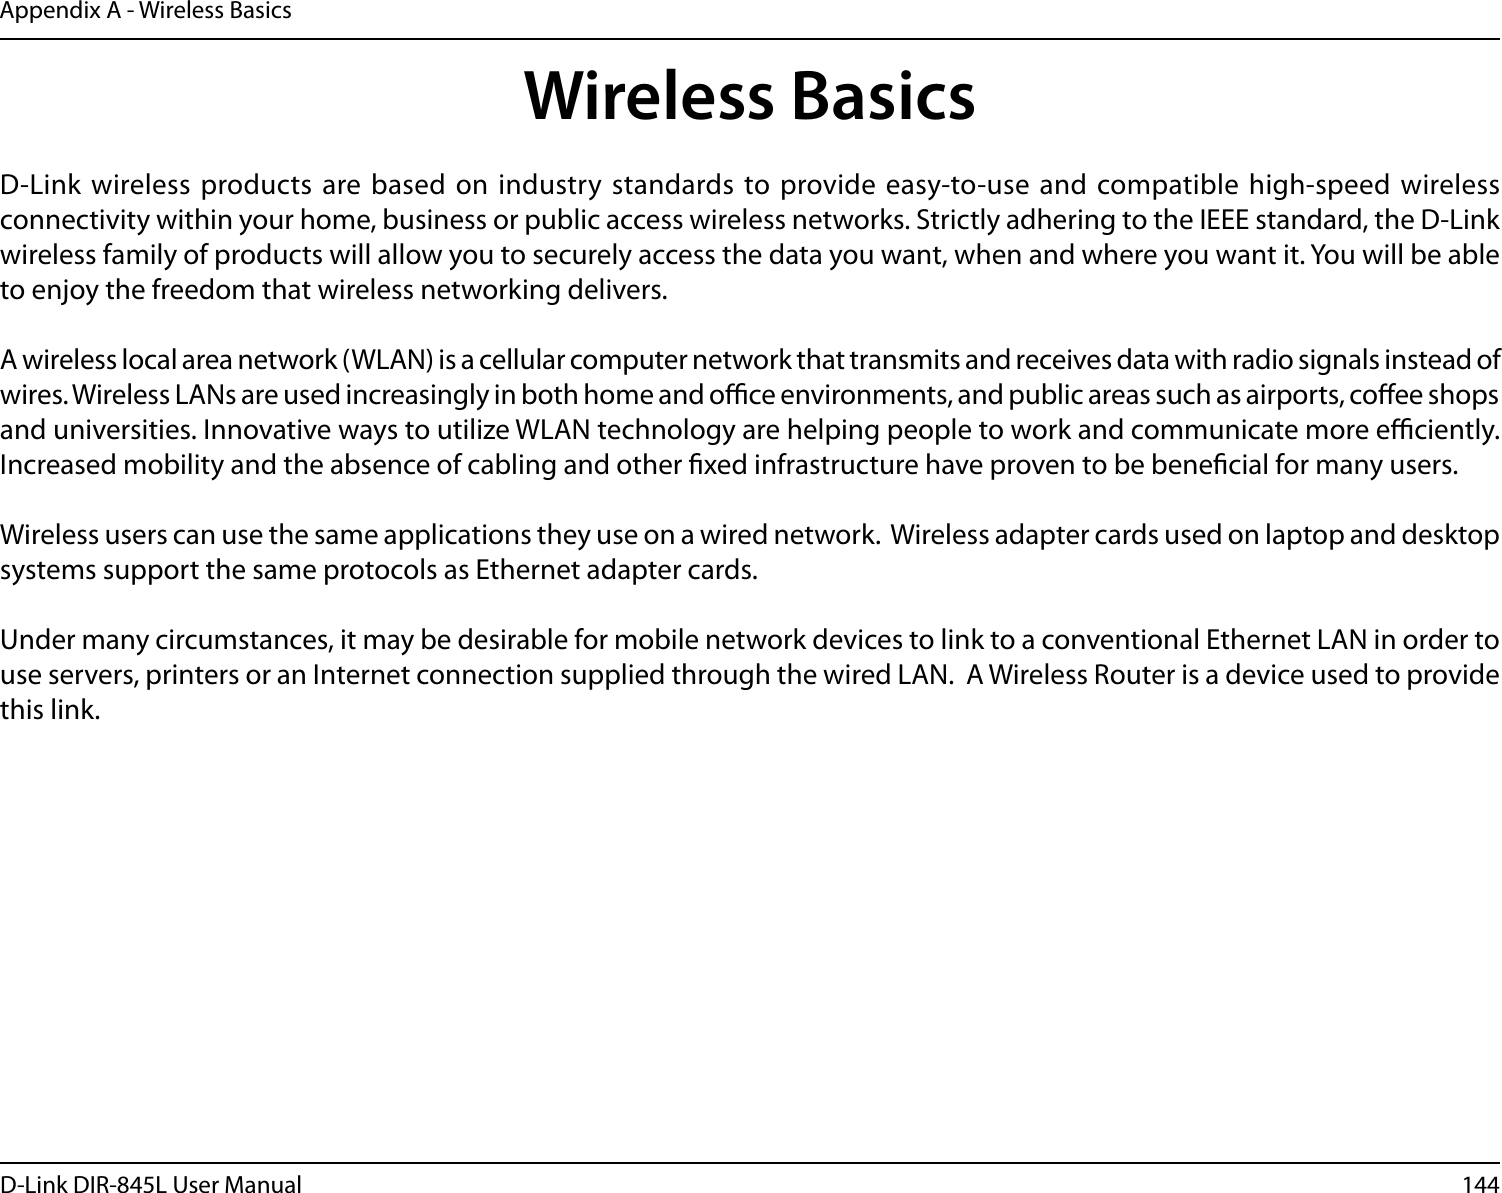 144D-Link DIR-845L User ManualAppendix A - Wireless BasicsD-Link  wireless products  are based on industry standards to provide easy-to-use  and compatible high-speed wireless connectivity within your home, business or public access wireless networks. Strictly adhering to the IEEE standard, the D-Link wireless family of products will allow you to securely access the data you want, when and where you want it. You will be able to enjoy the freedom that wireless networking delivers.A wireless local area network (WLAN) is a cellular computer network that transmits and receives data with radio signals instead of wires. Wireless LANs are used increasingly in both home and oce environments, and public areas such as airports, coee shops and universities. Innovative ways to utilize WLAN technology are helping people to work and communicate more eciently. Increased mobility and the absence of cabling and other xed infrastructure have proven to be benecial for many users. Wireless users can use the same applications they use on a wired network.  Wireless adapter cards used on laptop and desktop systems support the same protocols as Ethernet adapter cards. Under many circumstances, it may be desirable for mobile network devices to link to a conventional Ethernet LAN in order to use servers, printers or an Internet connection supplied through the wired LAN.  A Wireless Router is a device used to provide this link.Wireless Basics